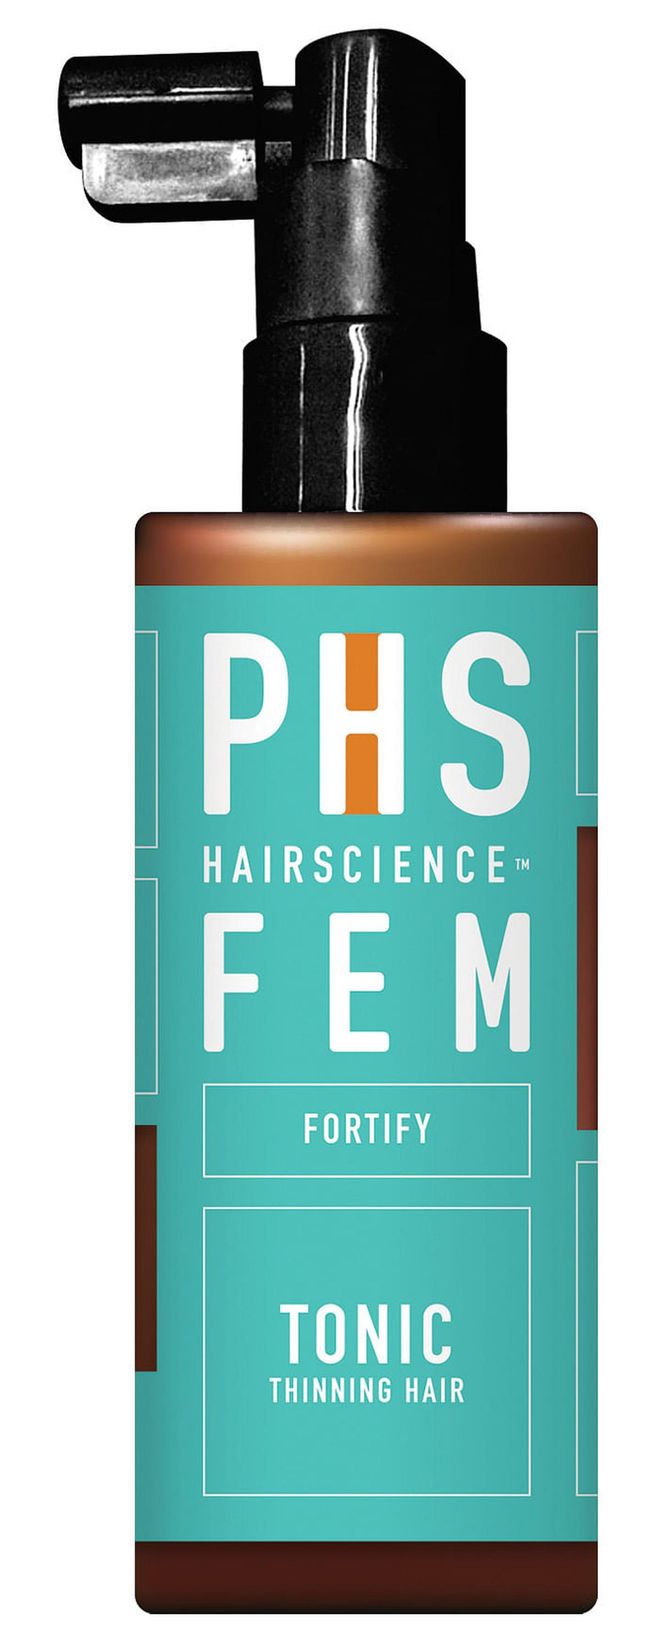 Just like how a serum penetrates deep into the skin to deliver active ingredients to the cells, PHS HAIRSCIENCE’s FEM Fortify Tonic contains potent botanicals to encourage cellular regeneration and oxygenate the cells. Oat protein and soya extracts boost scalp immunity and protect hair follicles from damage, while lotus stem cells improve microcirculation and stimulate healthier, fuller hair growth. FEM Fortify Tonic, $99 for 100ml, PHS HAIRSCIENCE